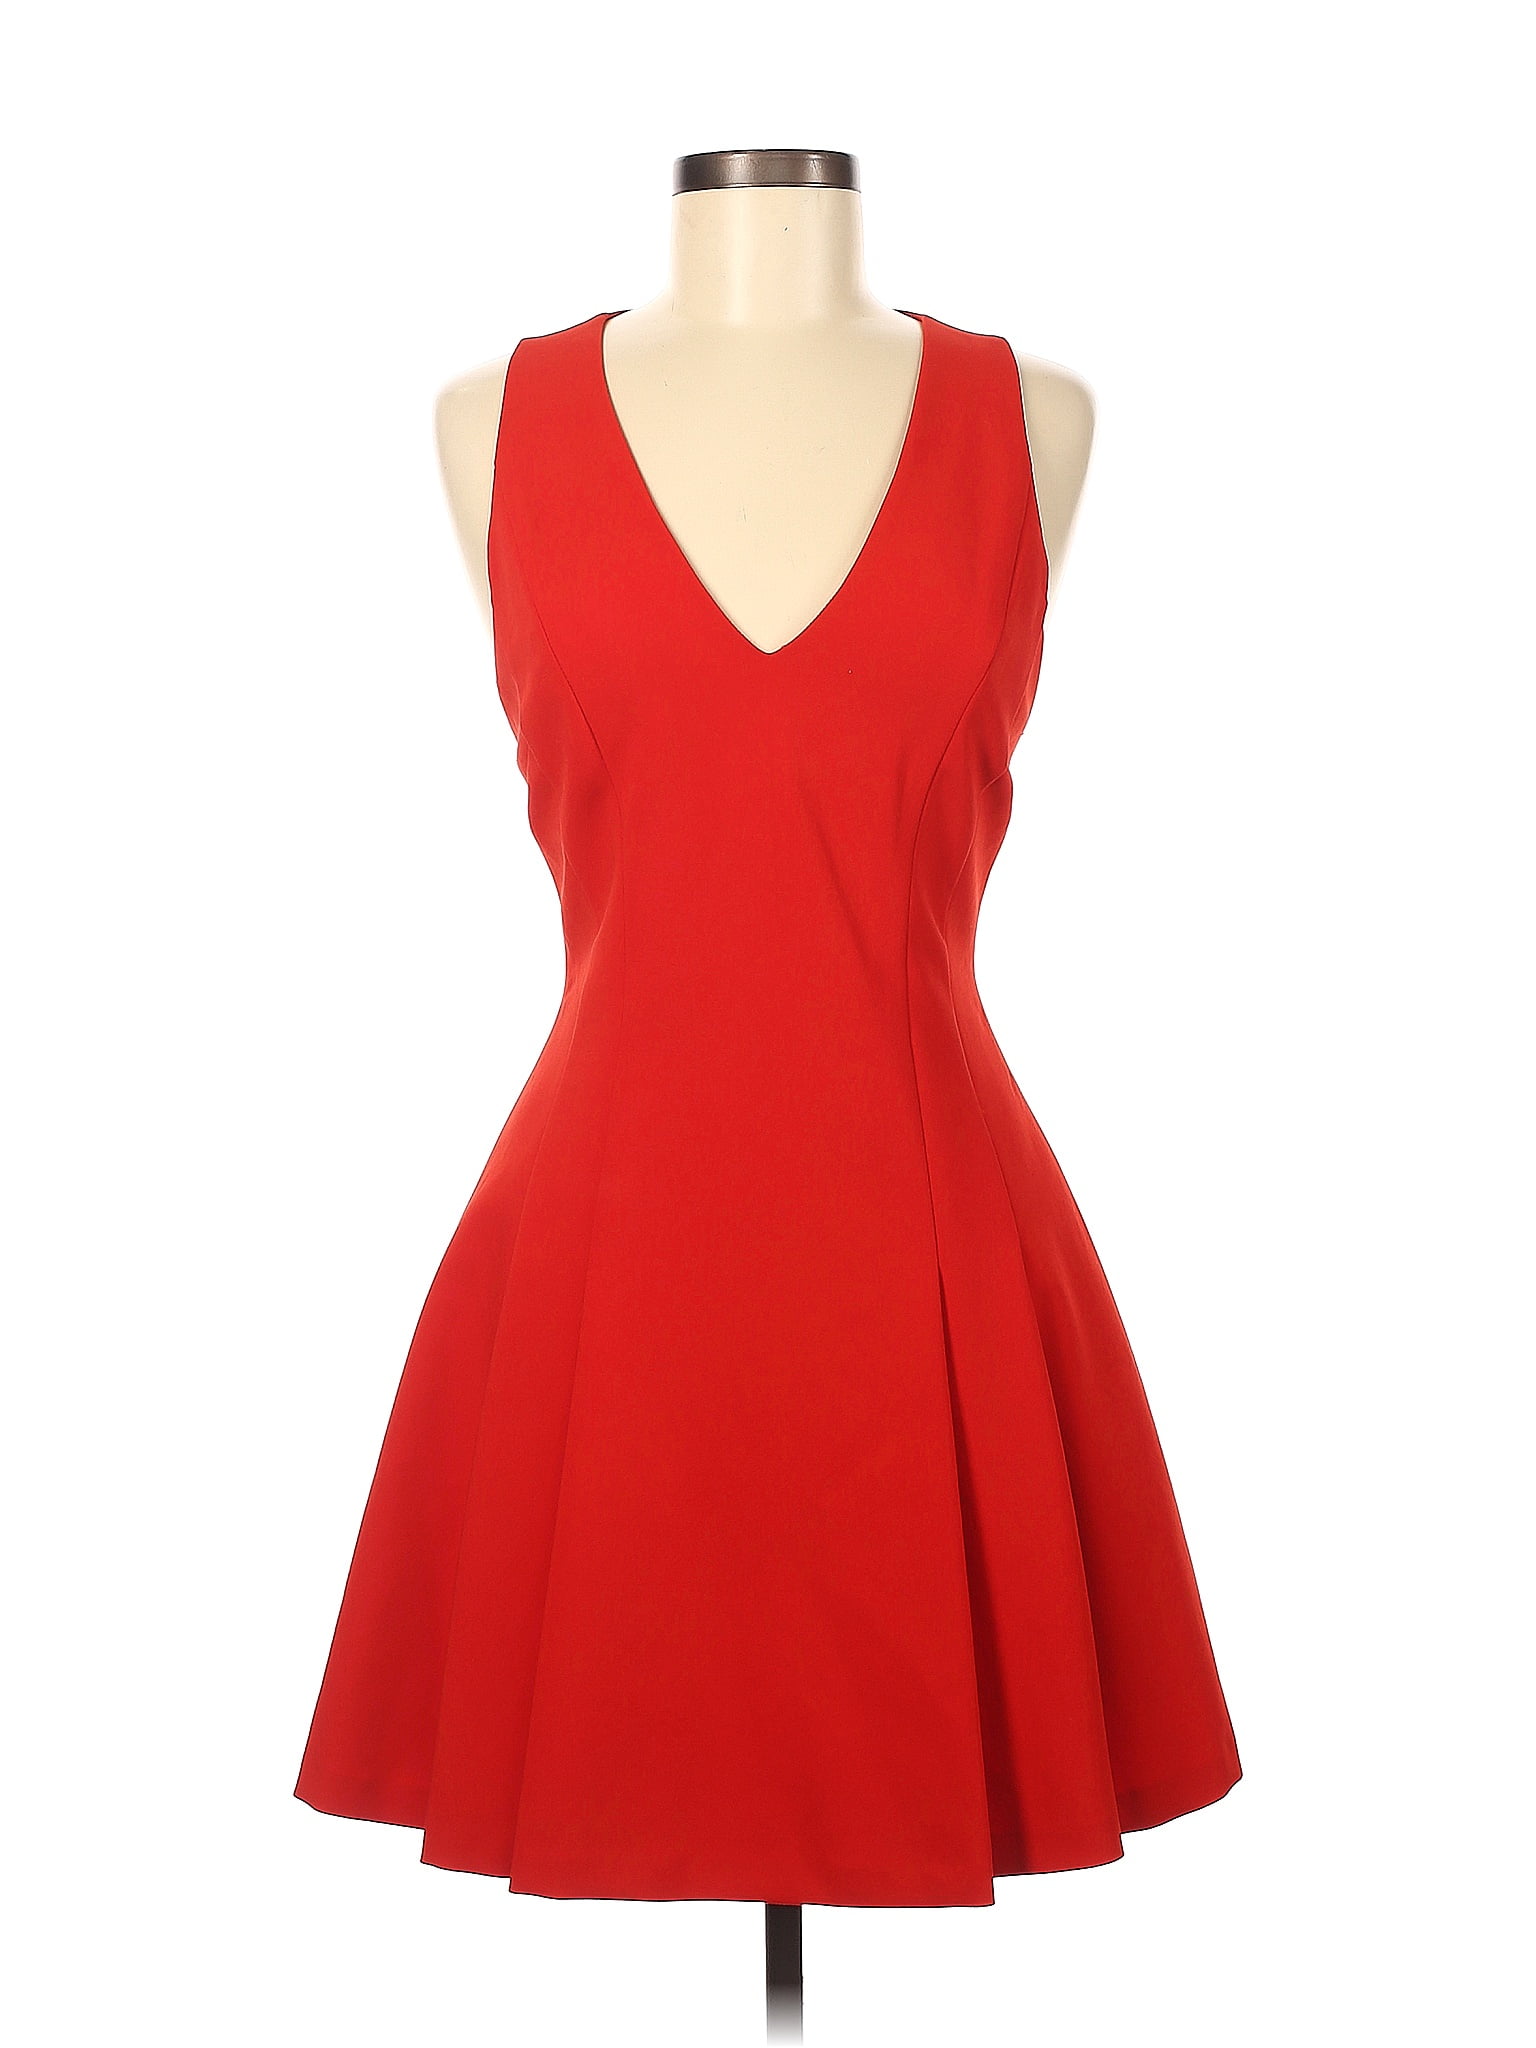 Alice + Olivia Solid Red Casual Dress Size 6 - 83% off | ThredUp